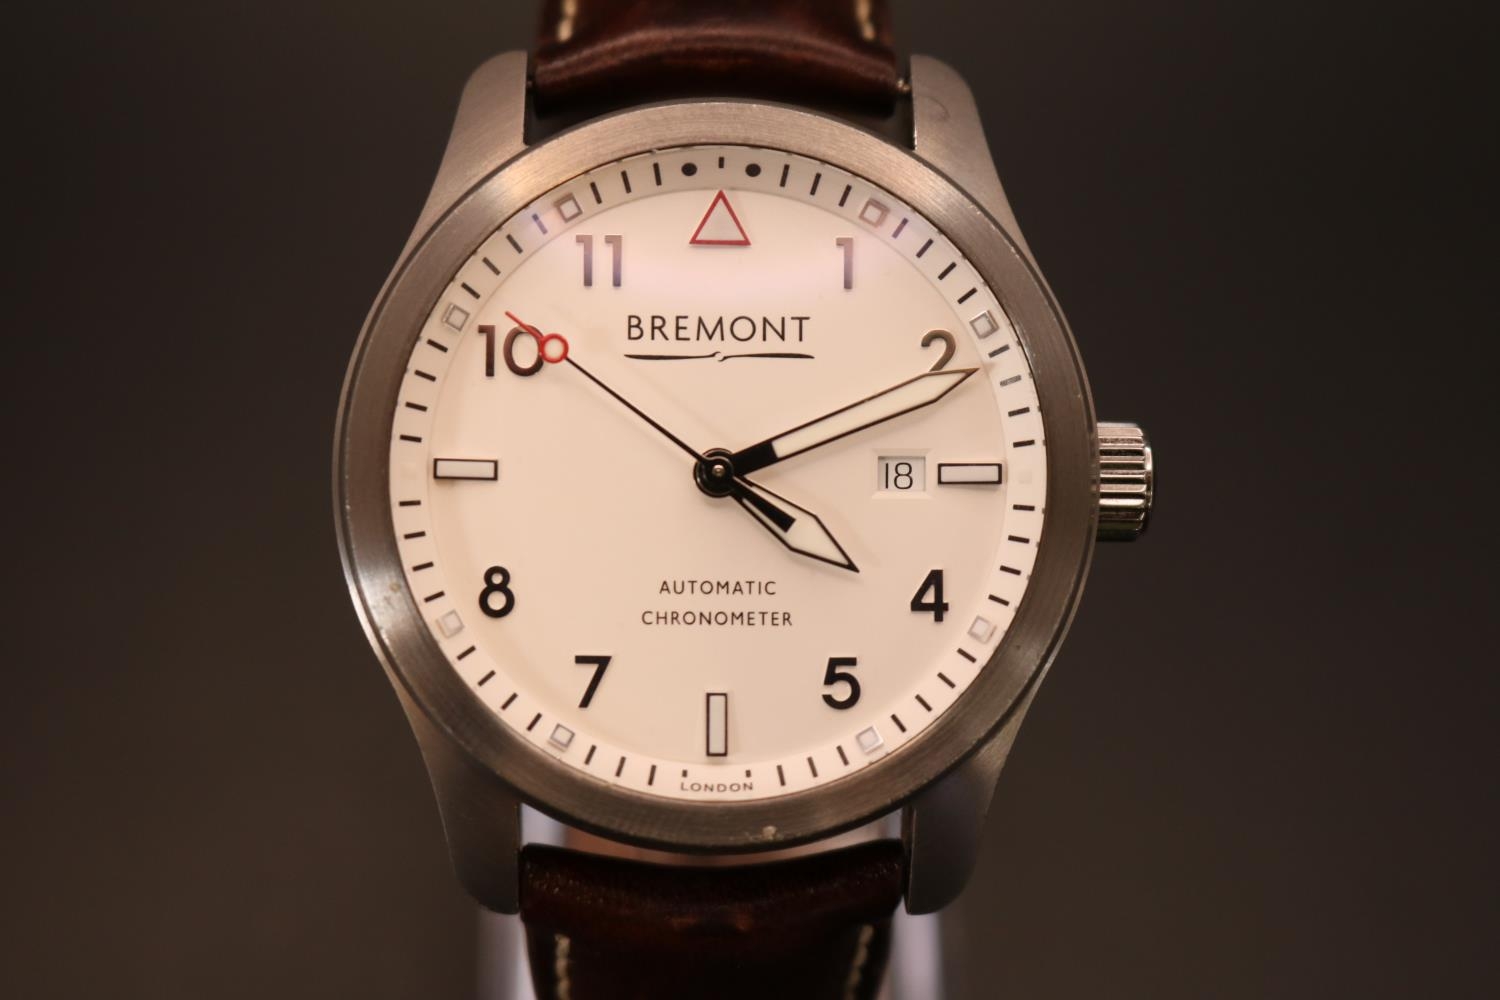 Bremont Automatic Chronometer Swiss movement watch, with box and papers. Reference no SOLO/23310. - Image 2 of 4